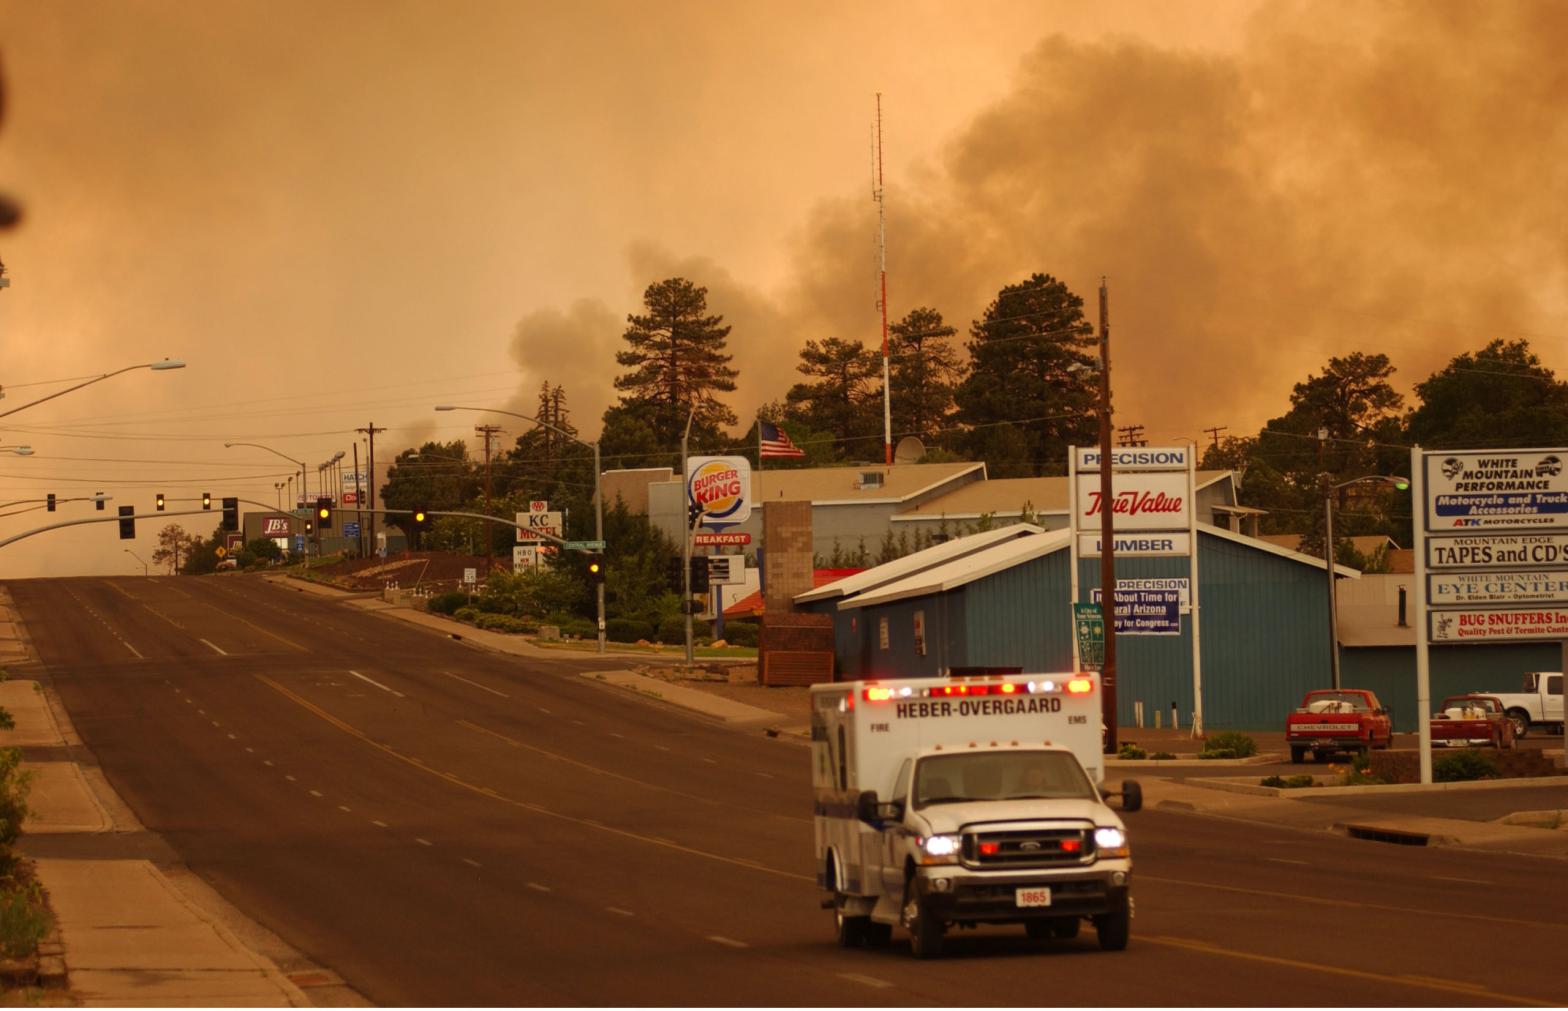 An ambulance from the towns of Heber and Overgaard on June 24, 2002 in Show Low, Arizona as smoke envelops the evacuated town during a wildfire. (Photo: David McNew, Getty Images)